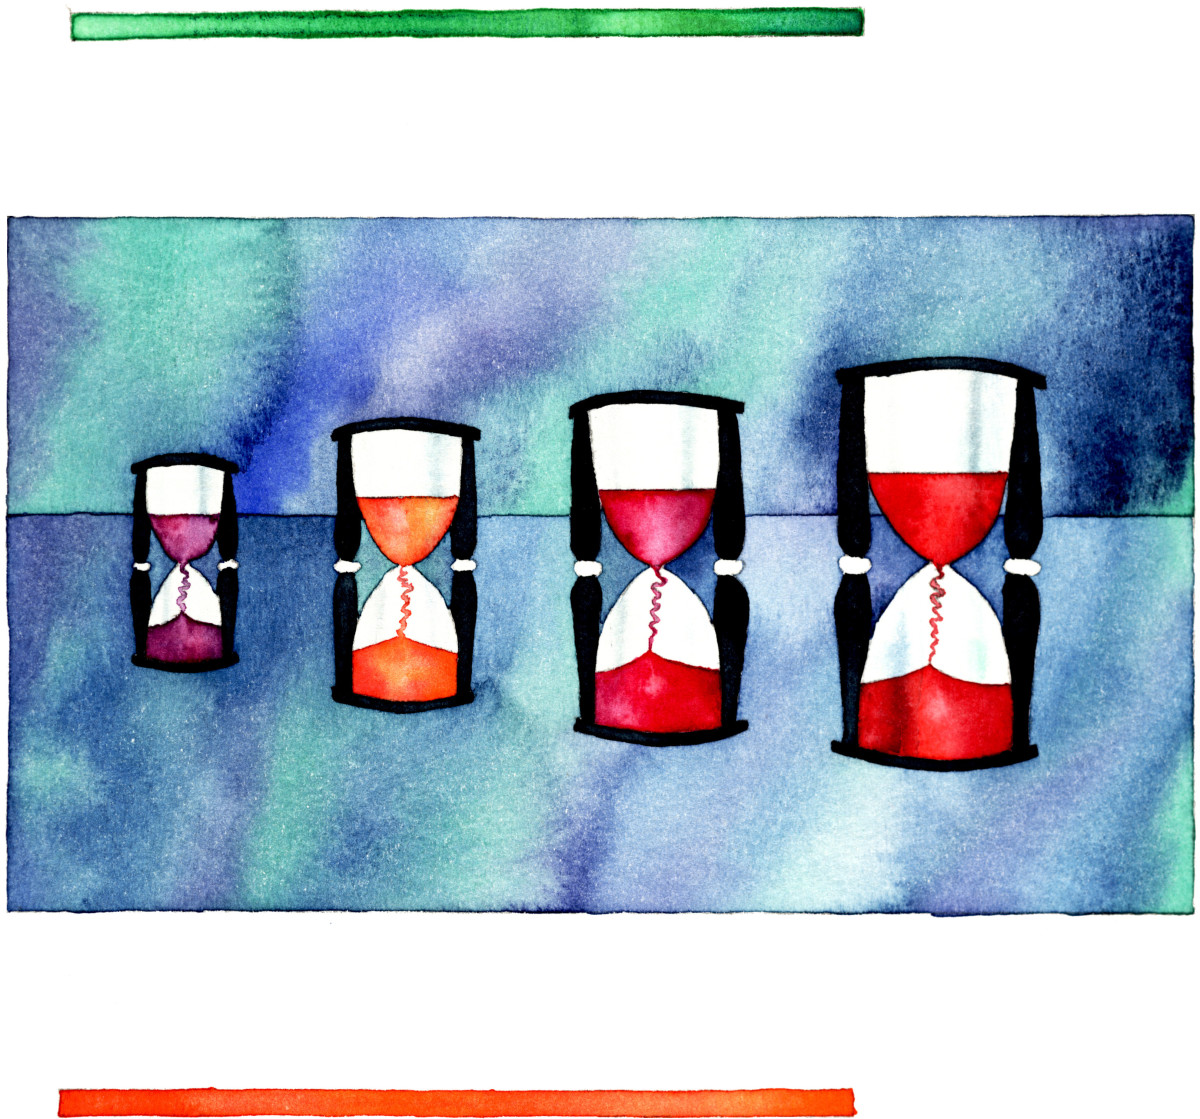 Hourglasses by alice brickner  Image: Time passing